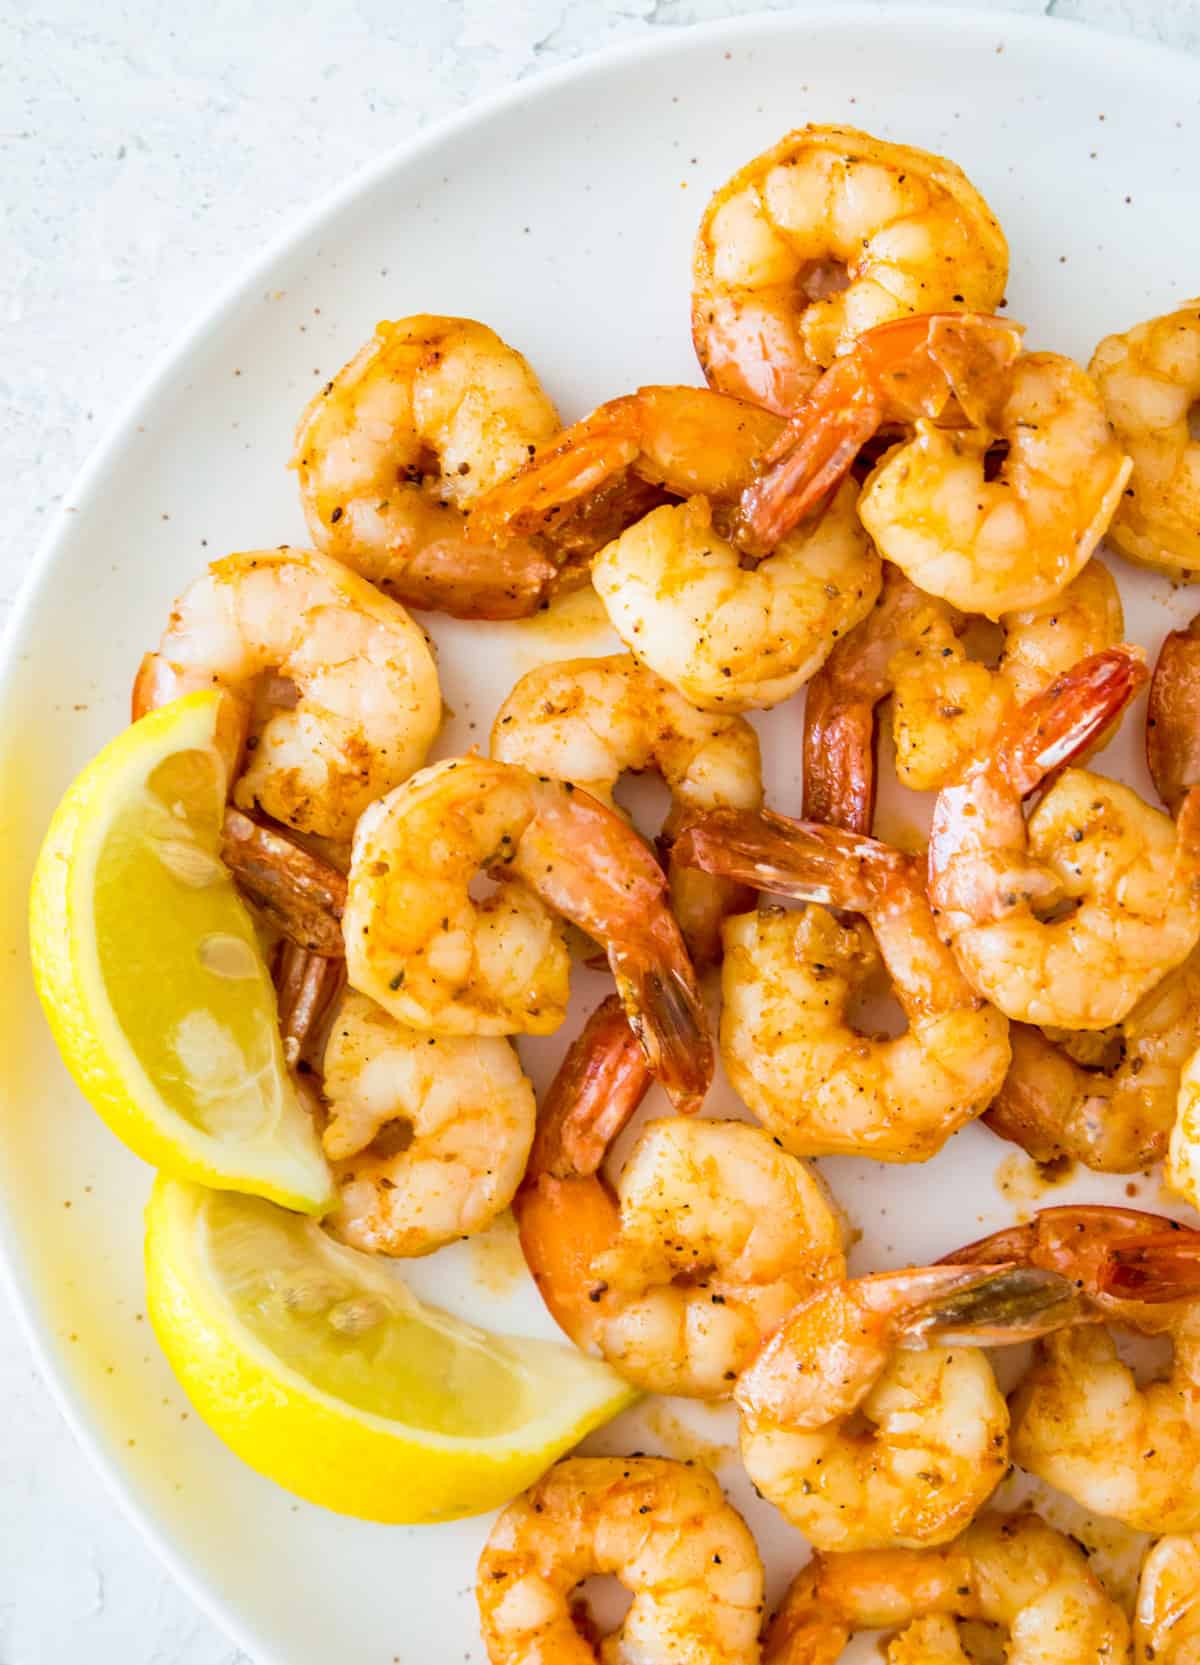 A plate with pan seared shrimp on it with lemon wedges beside them.